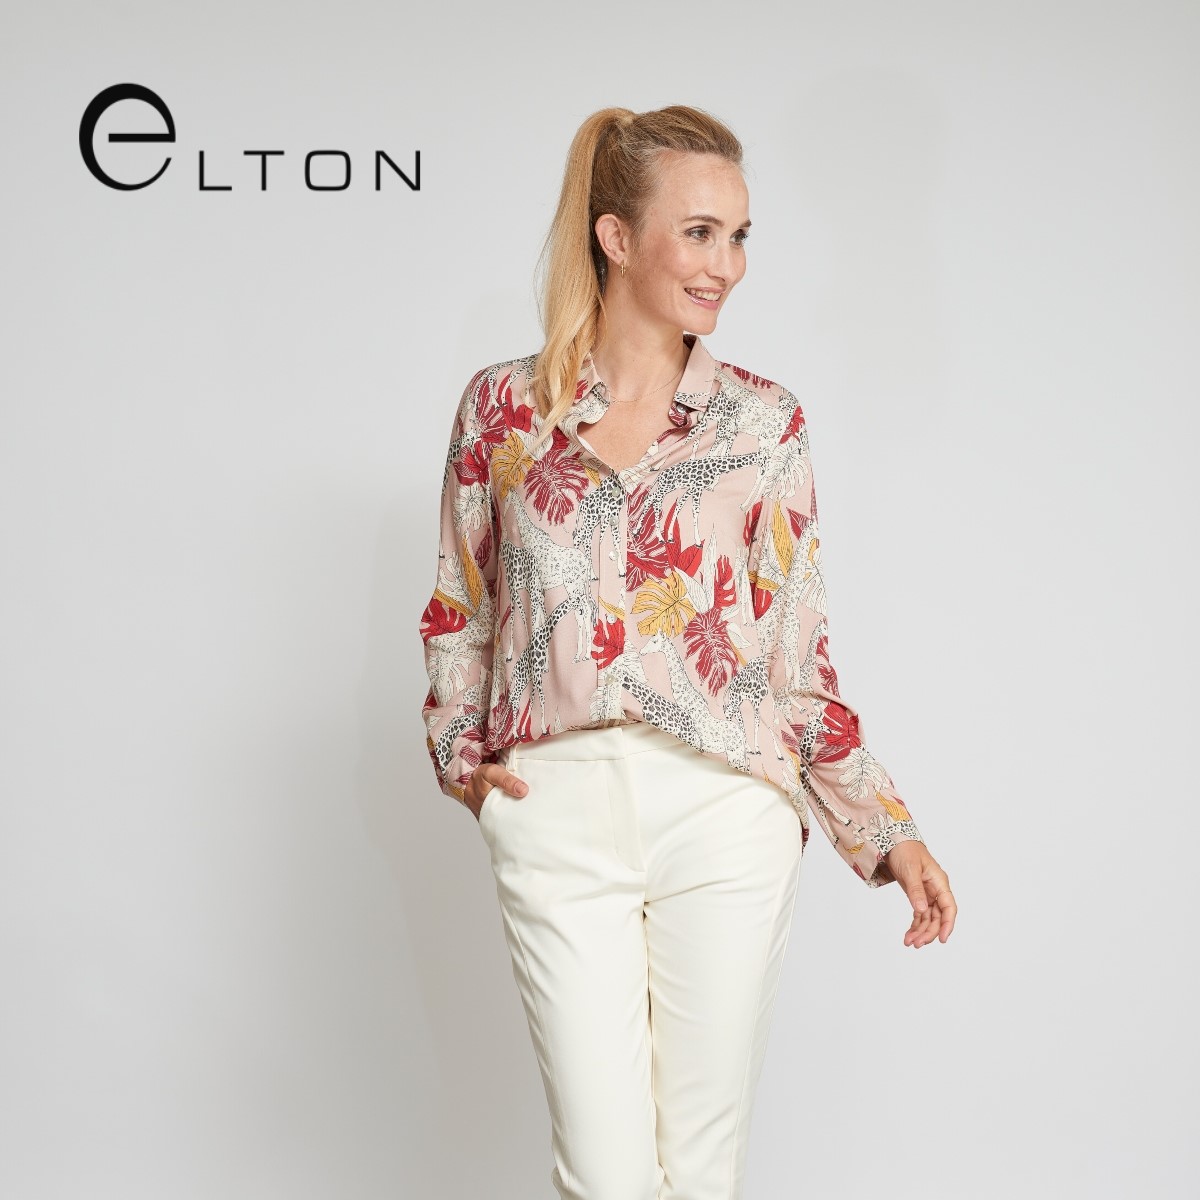 Pardon Clothing | Women's Fashion clothes → go to collections